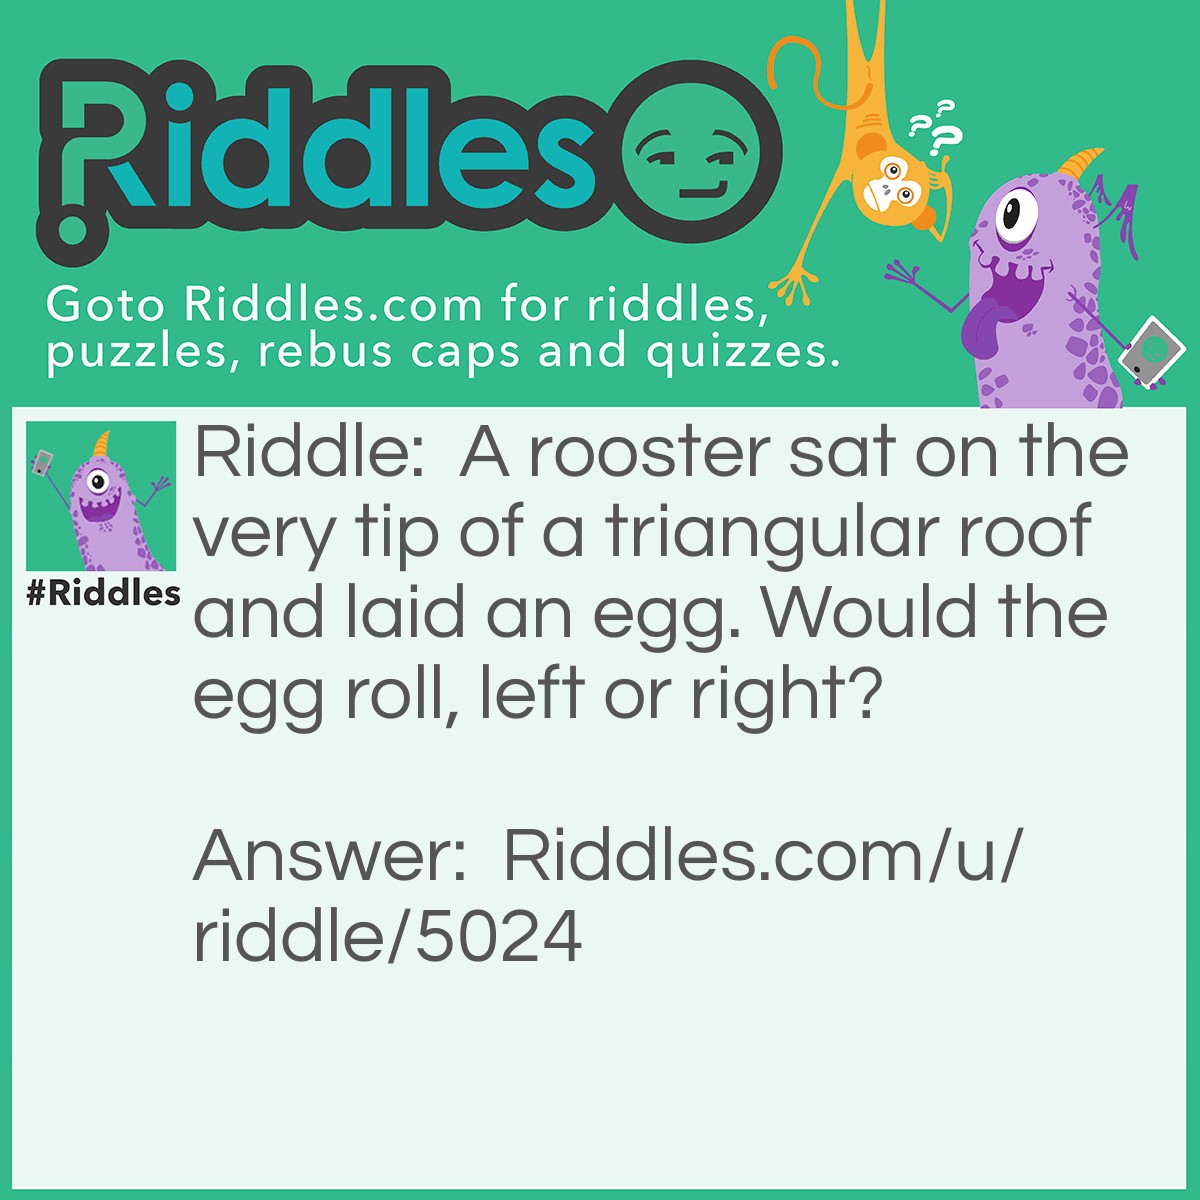 Riddle: A rooster sat on the very tip of a triangular roof and laid an egg. Would the egg roll, left or right? Answer: Roosters can't lay eggs!